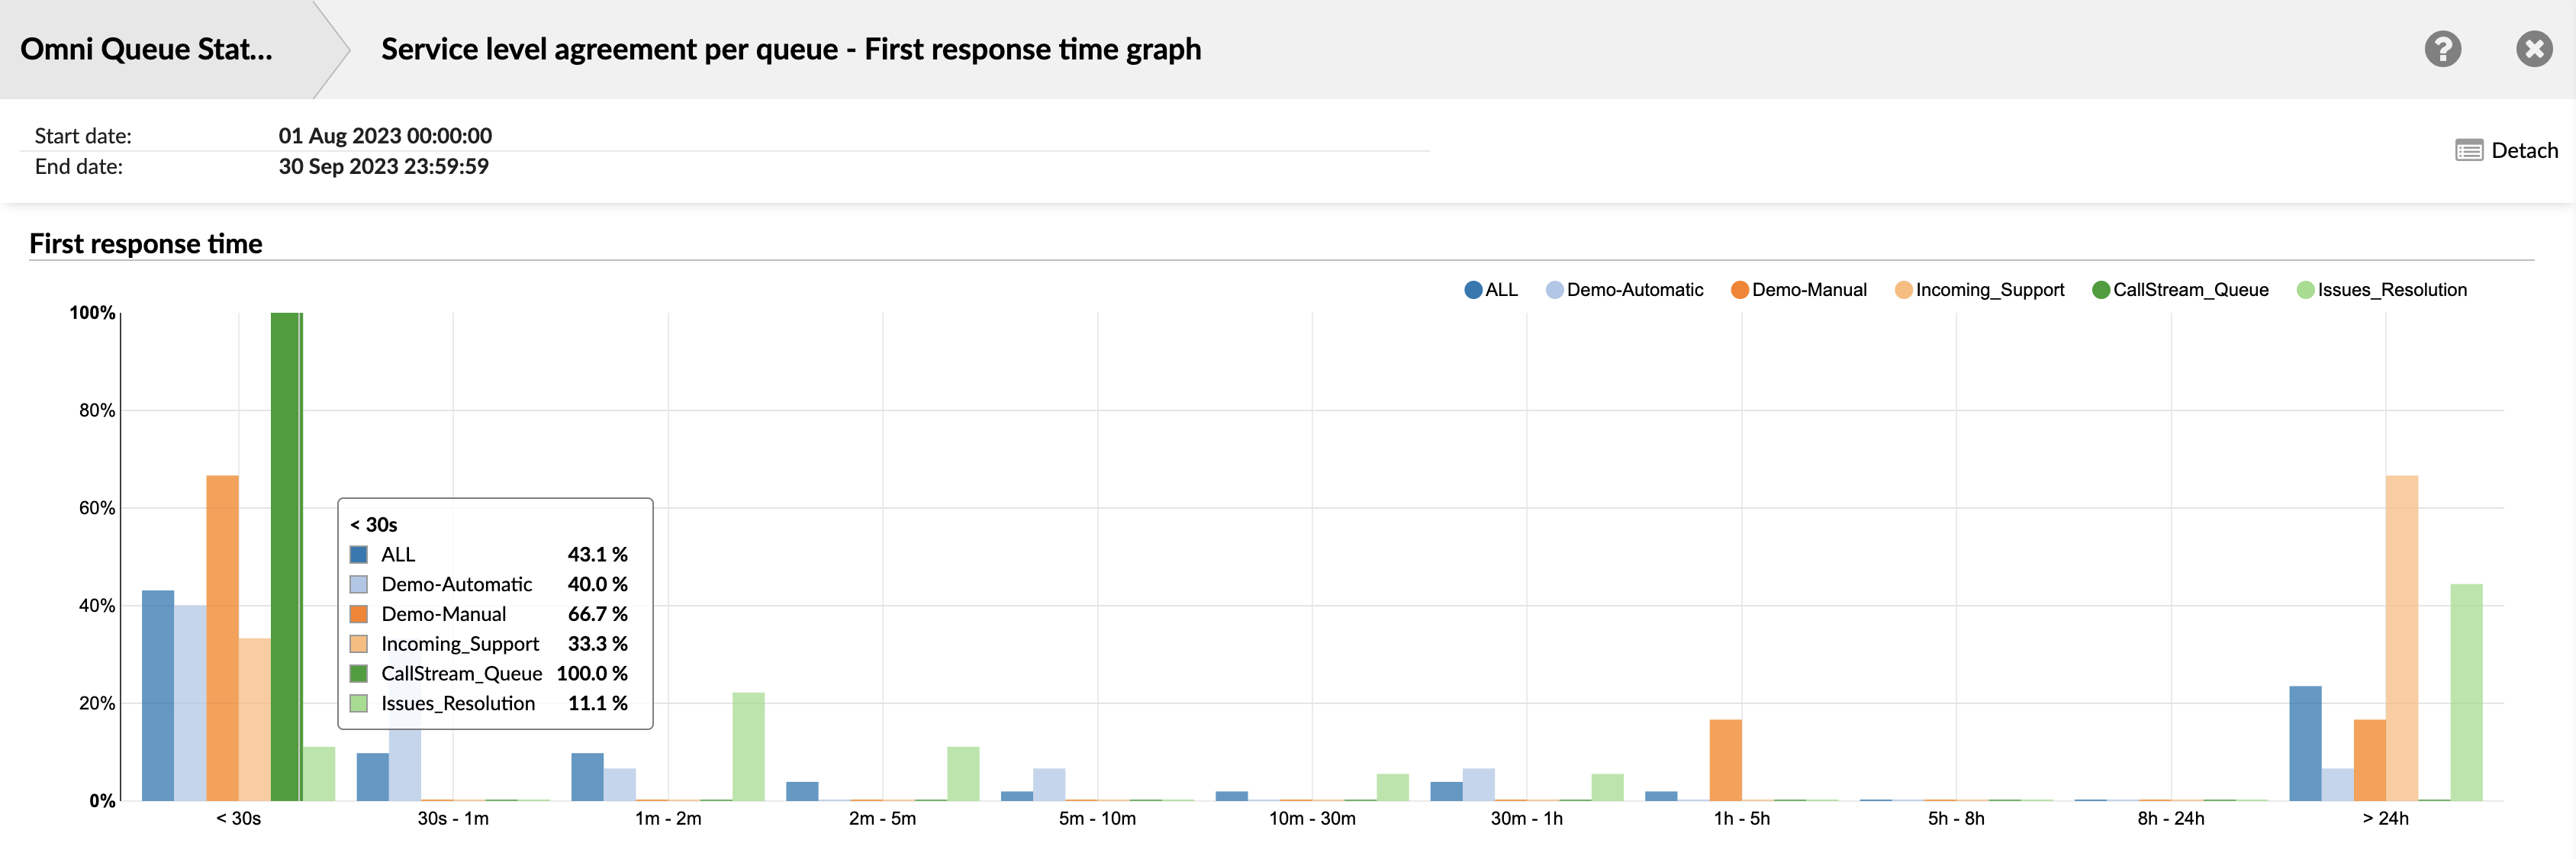 service_level_agreement_per_queue_-_first_response_time_graph.png